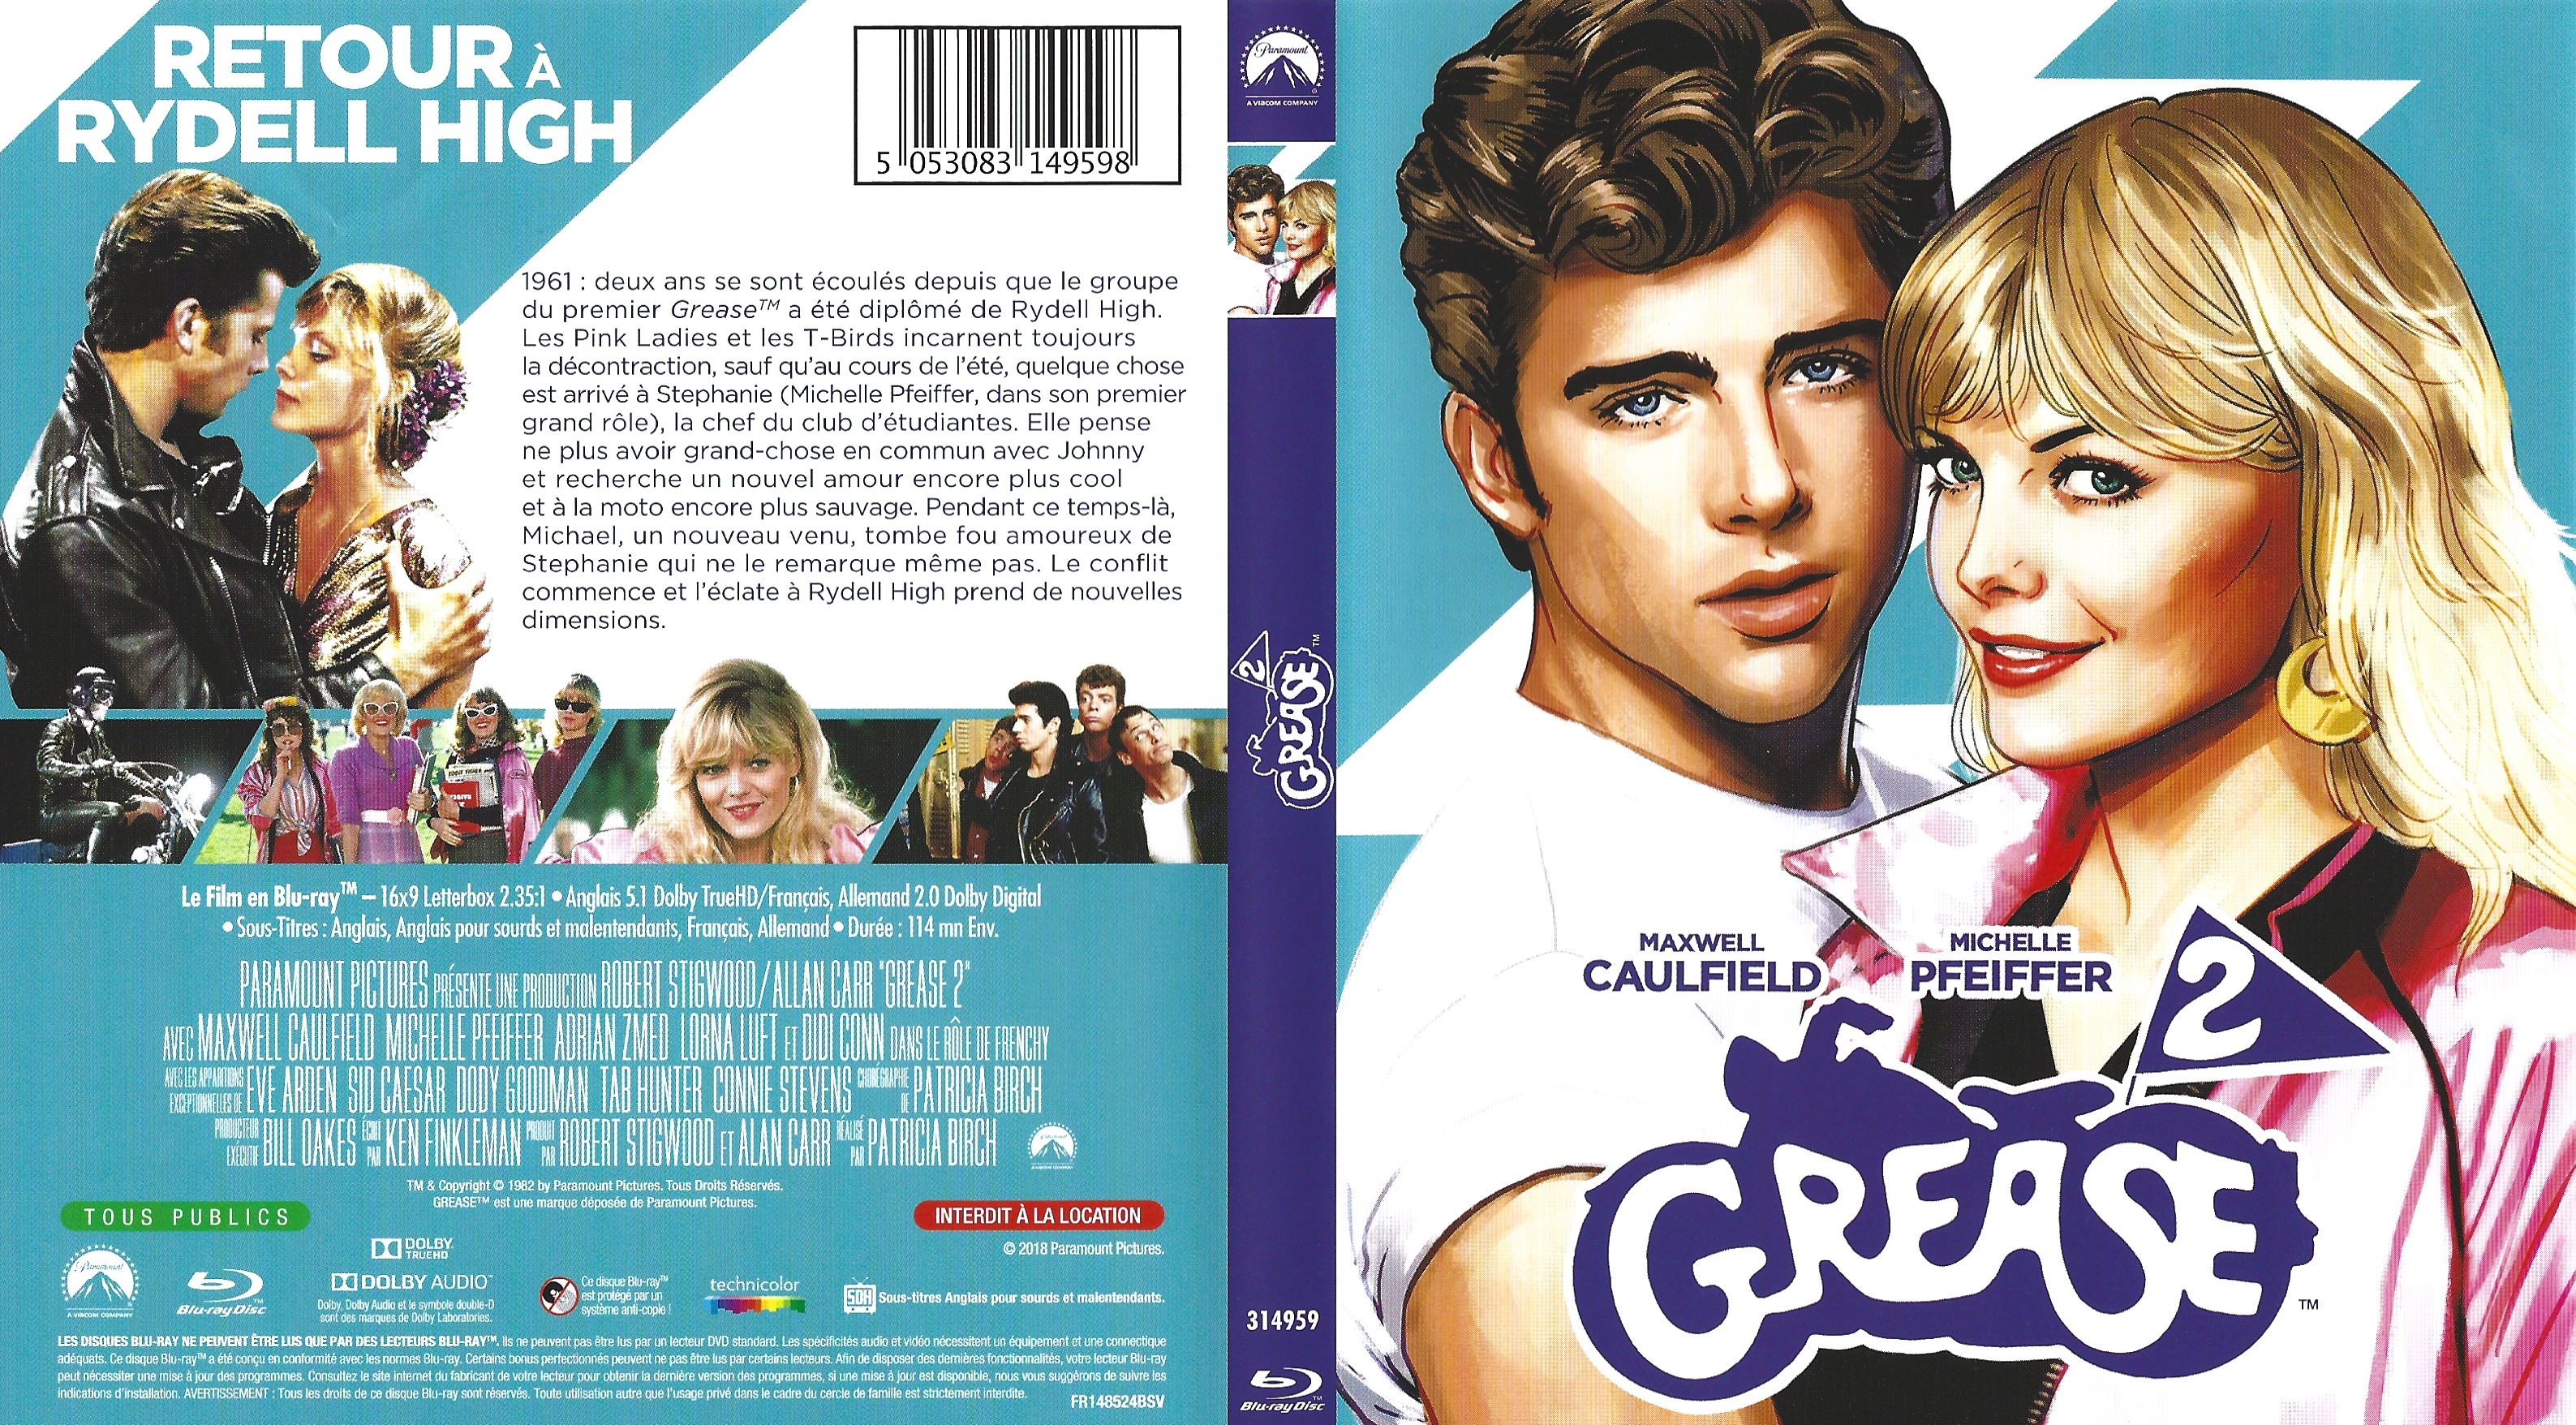 Jaquette DVD Grease 2 (BLU-RAY)